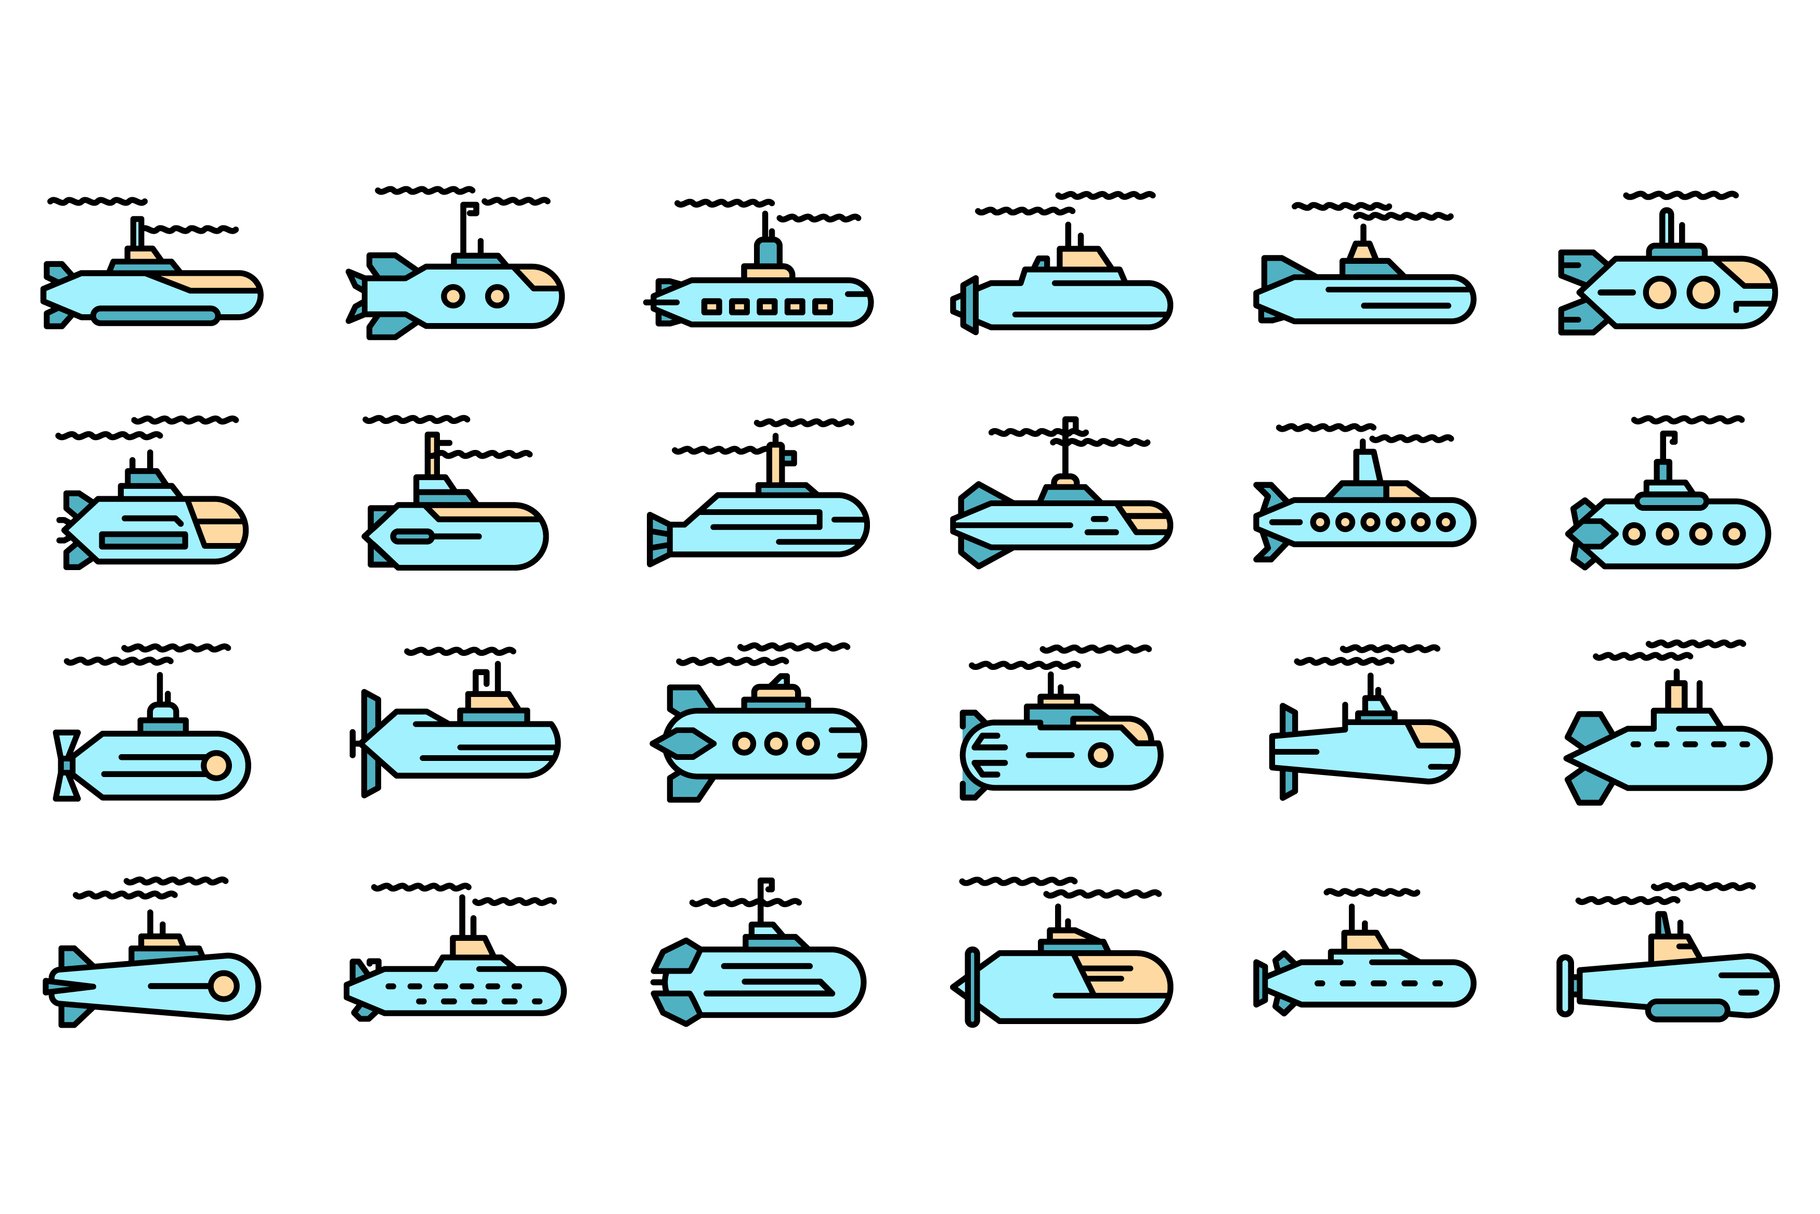 Submarine icons set vector flat cover image.